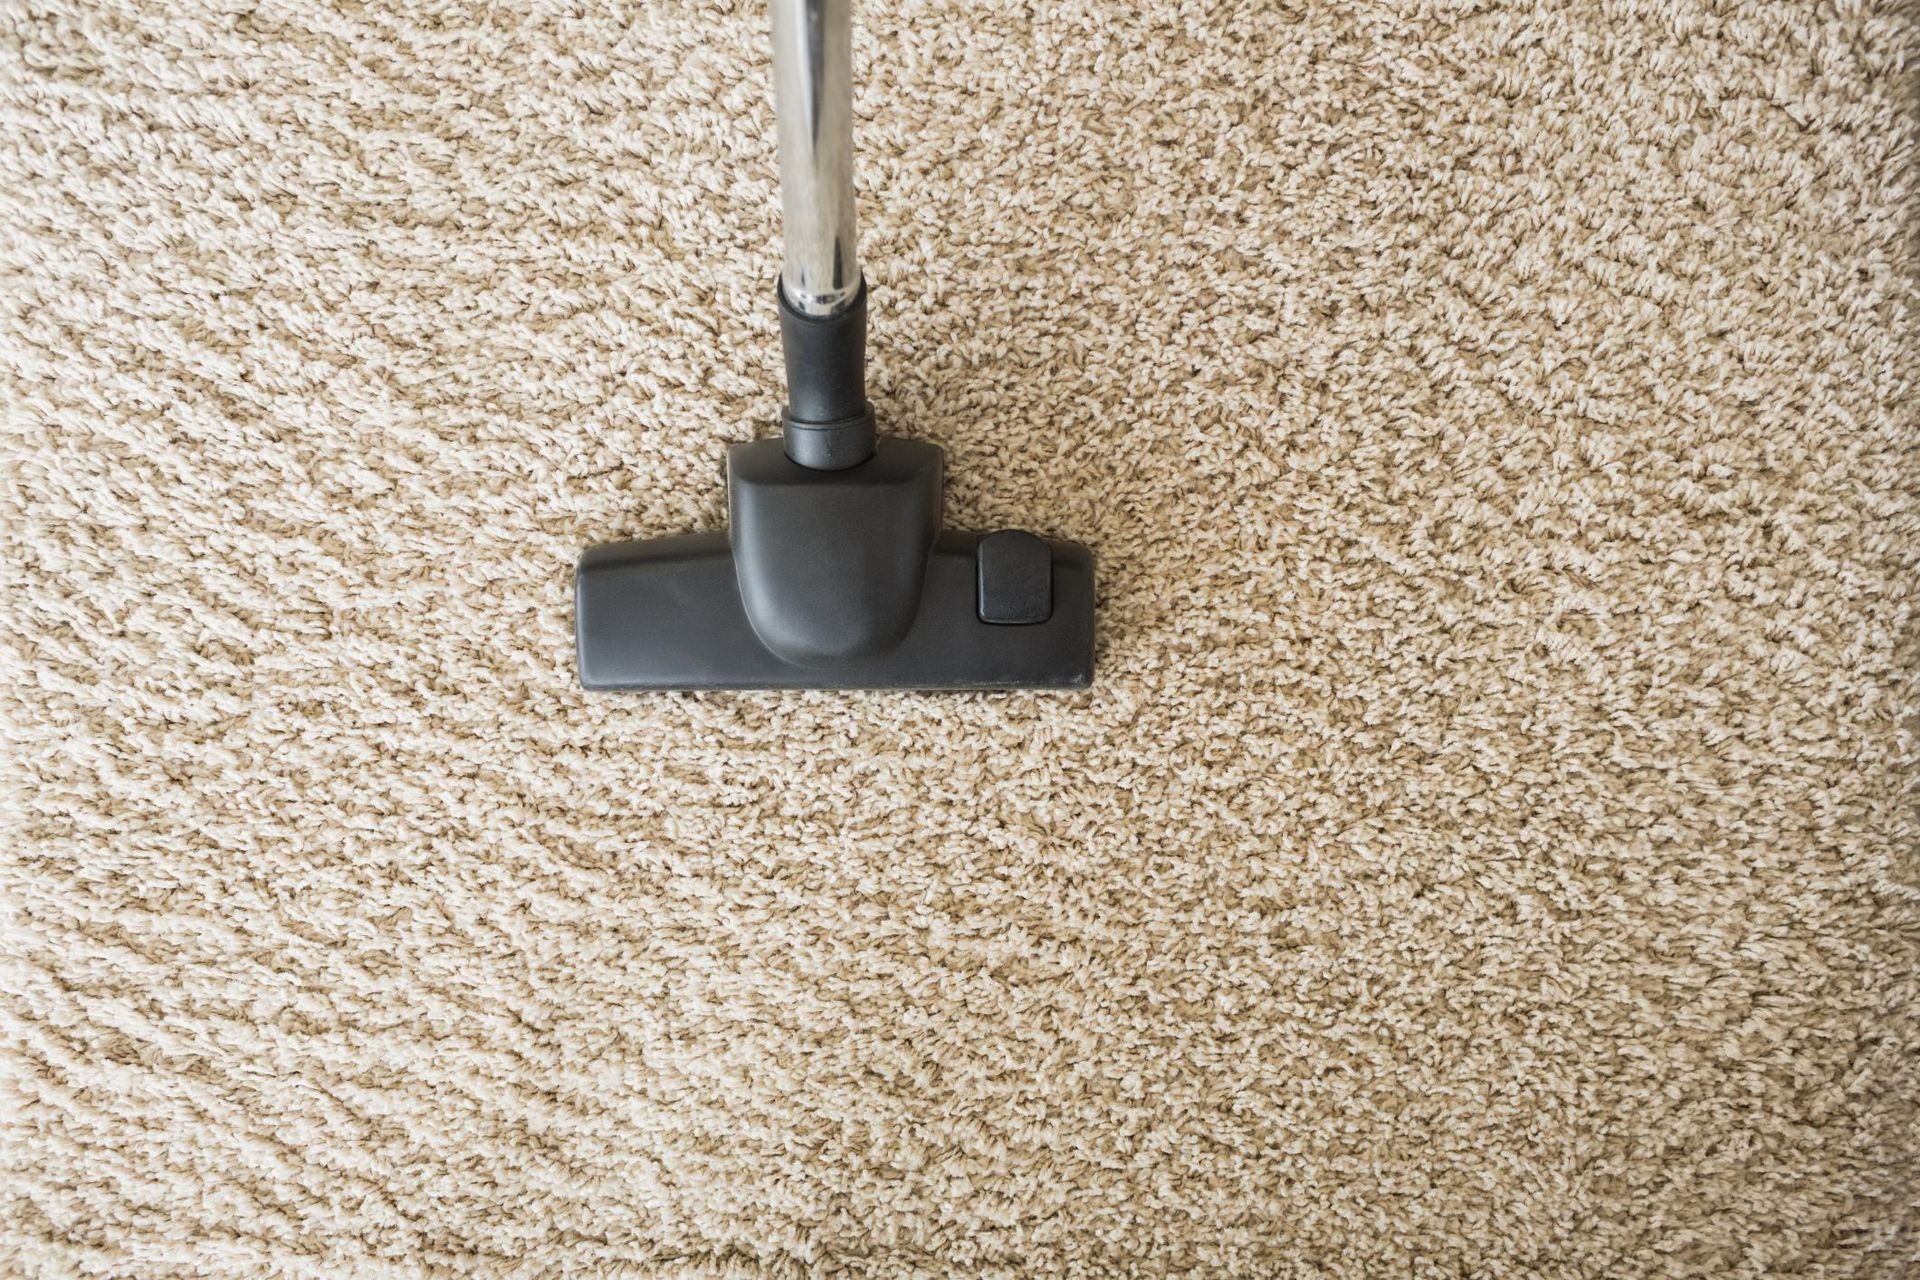 a close up of a vacuum cleaner on a carpet